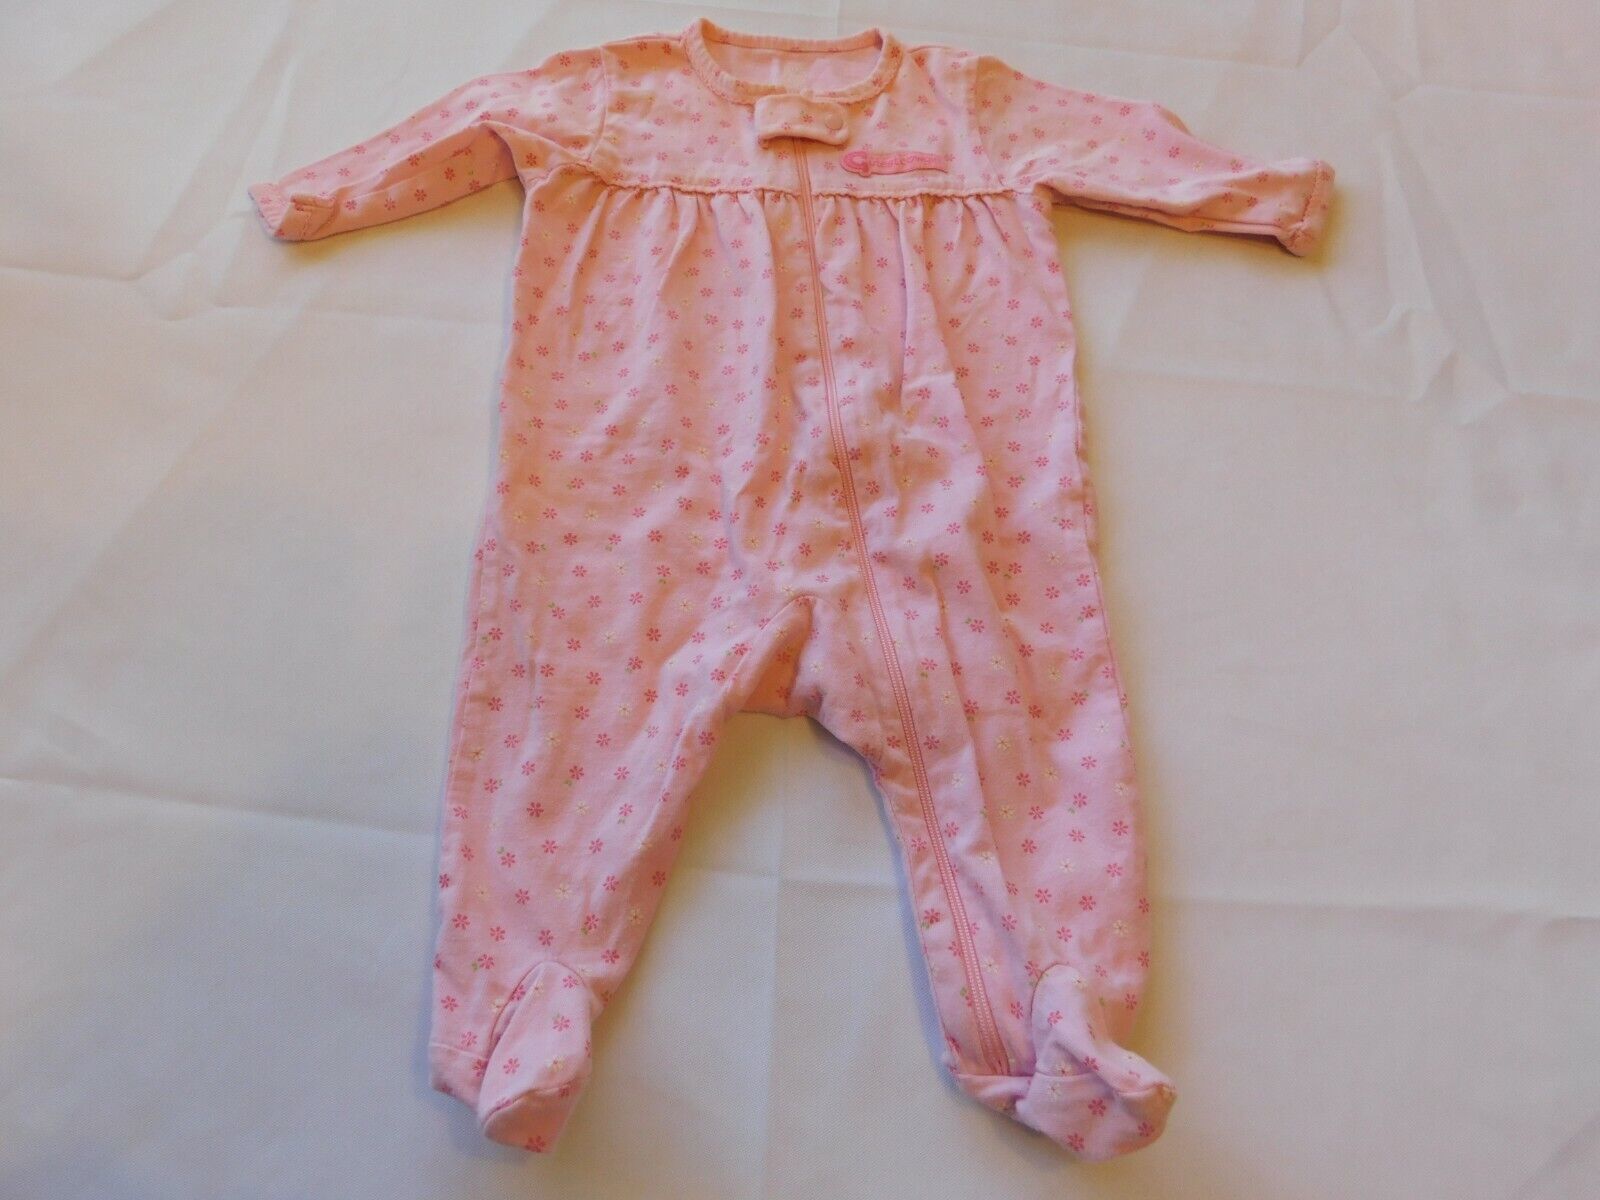 Carter's Just One Year Baby Girls One Piece Footed PJs Sleep PJ Size S small GUC - $10.29